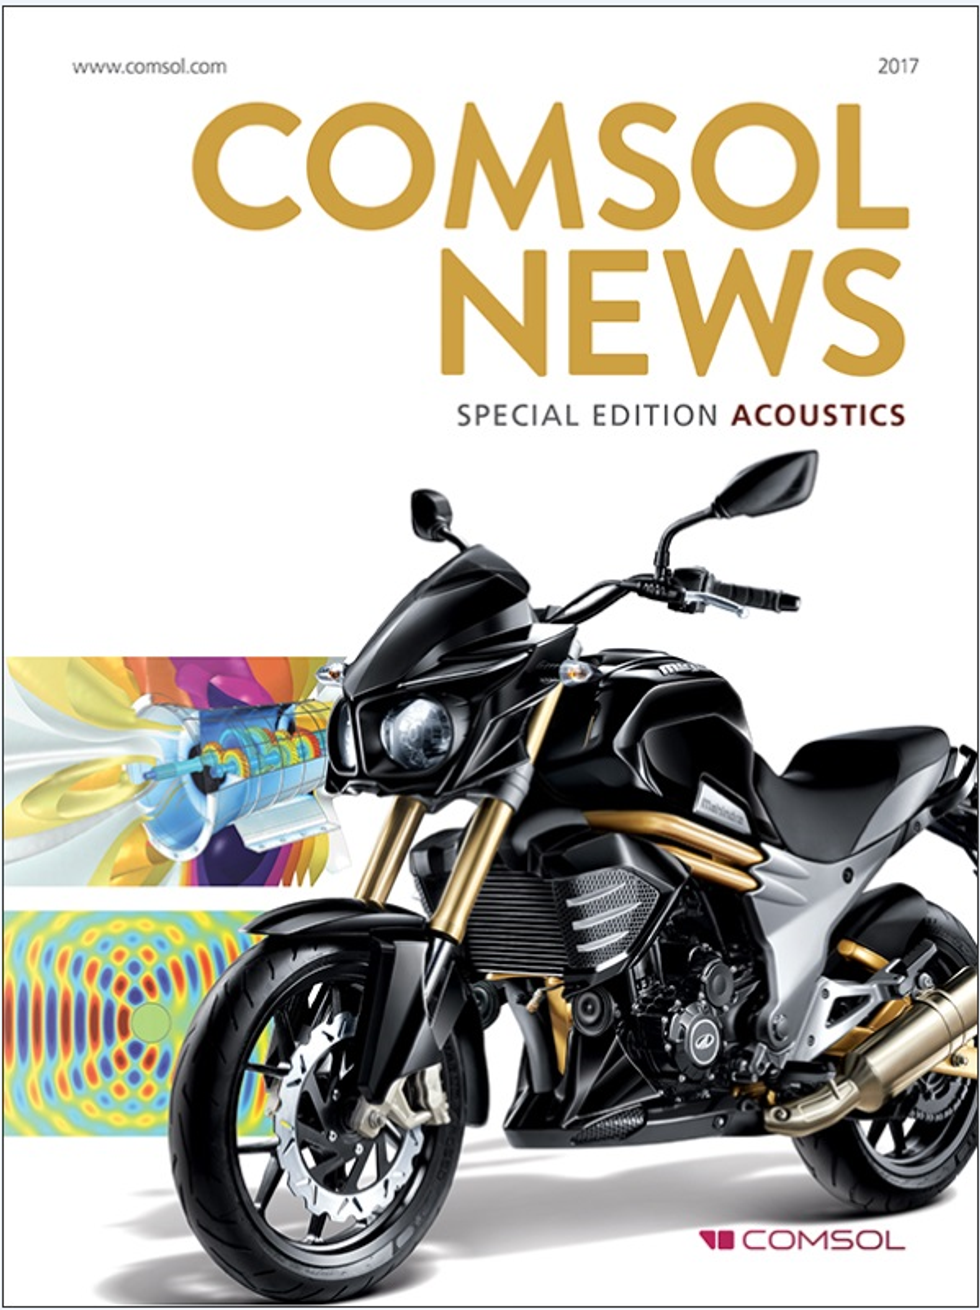 COMSOL, a leading provider of software solutions for multiphysics modeling, simulation, and application deployment, has published a special edition of its annual publication, COMSOL News, celebrating simulation specialists working in the field of acoustics.